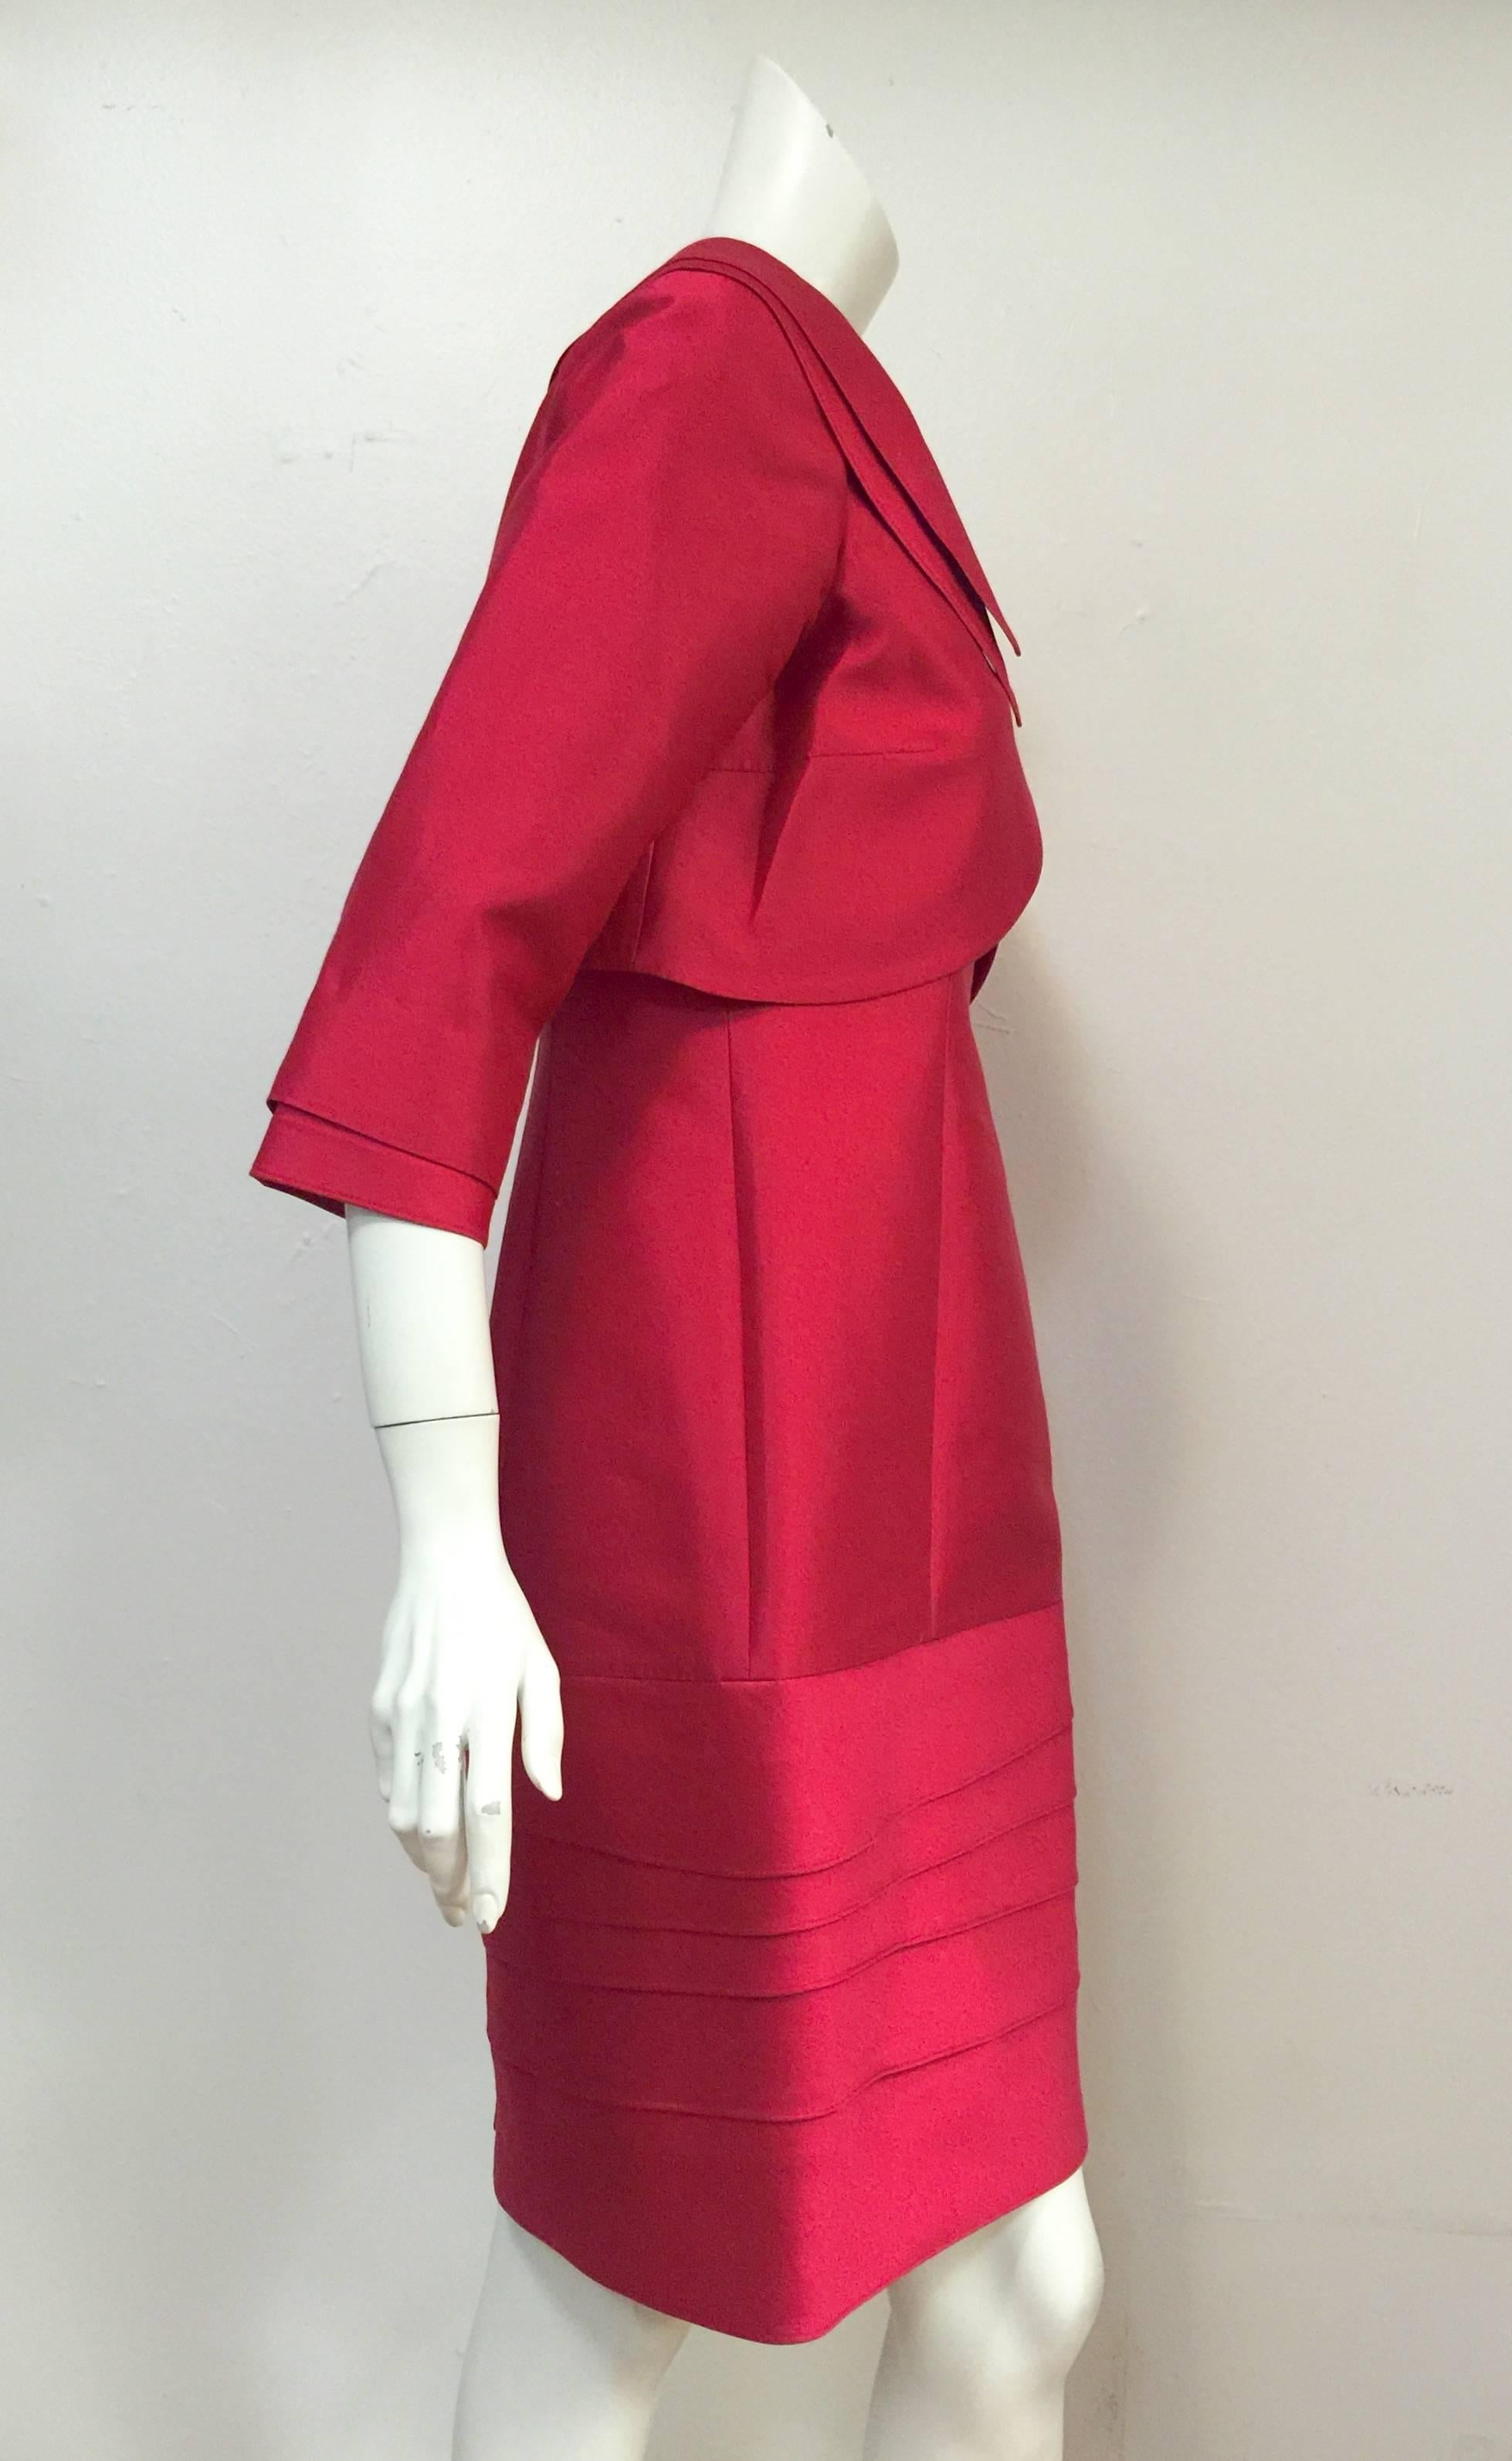 Teri Jon Shantung Jacketed Dress Ensemble is fit for a lady.  Fabulous fuschia fabric makes this confection unforgettable!  Features above the knee sleeveless sheath dress with bands of asymetric fabric from the lower body to hem.  Dress also has